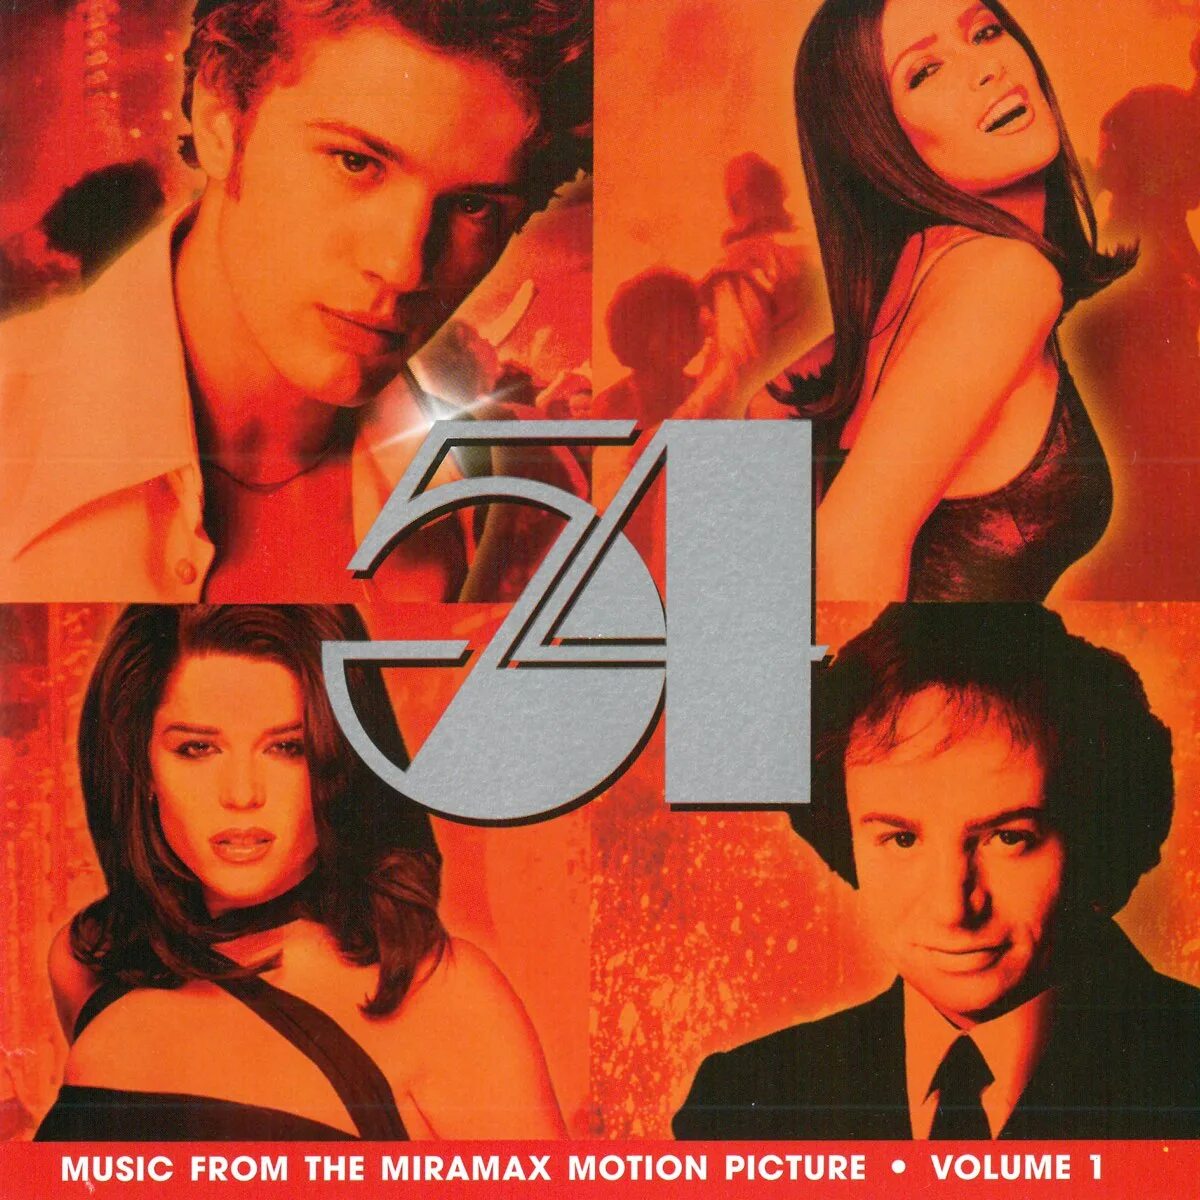 Студия 54 (1998). Music from the Motion picture. Постер "студия 54", 1998 г..